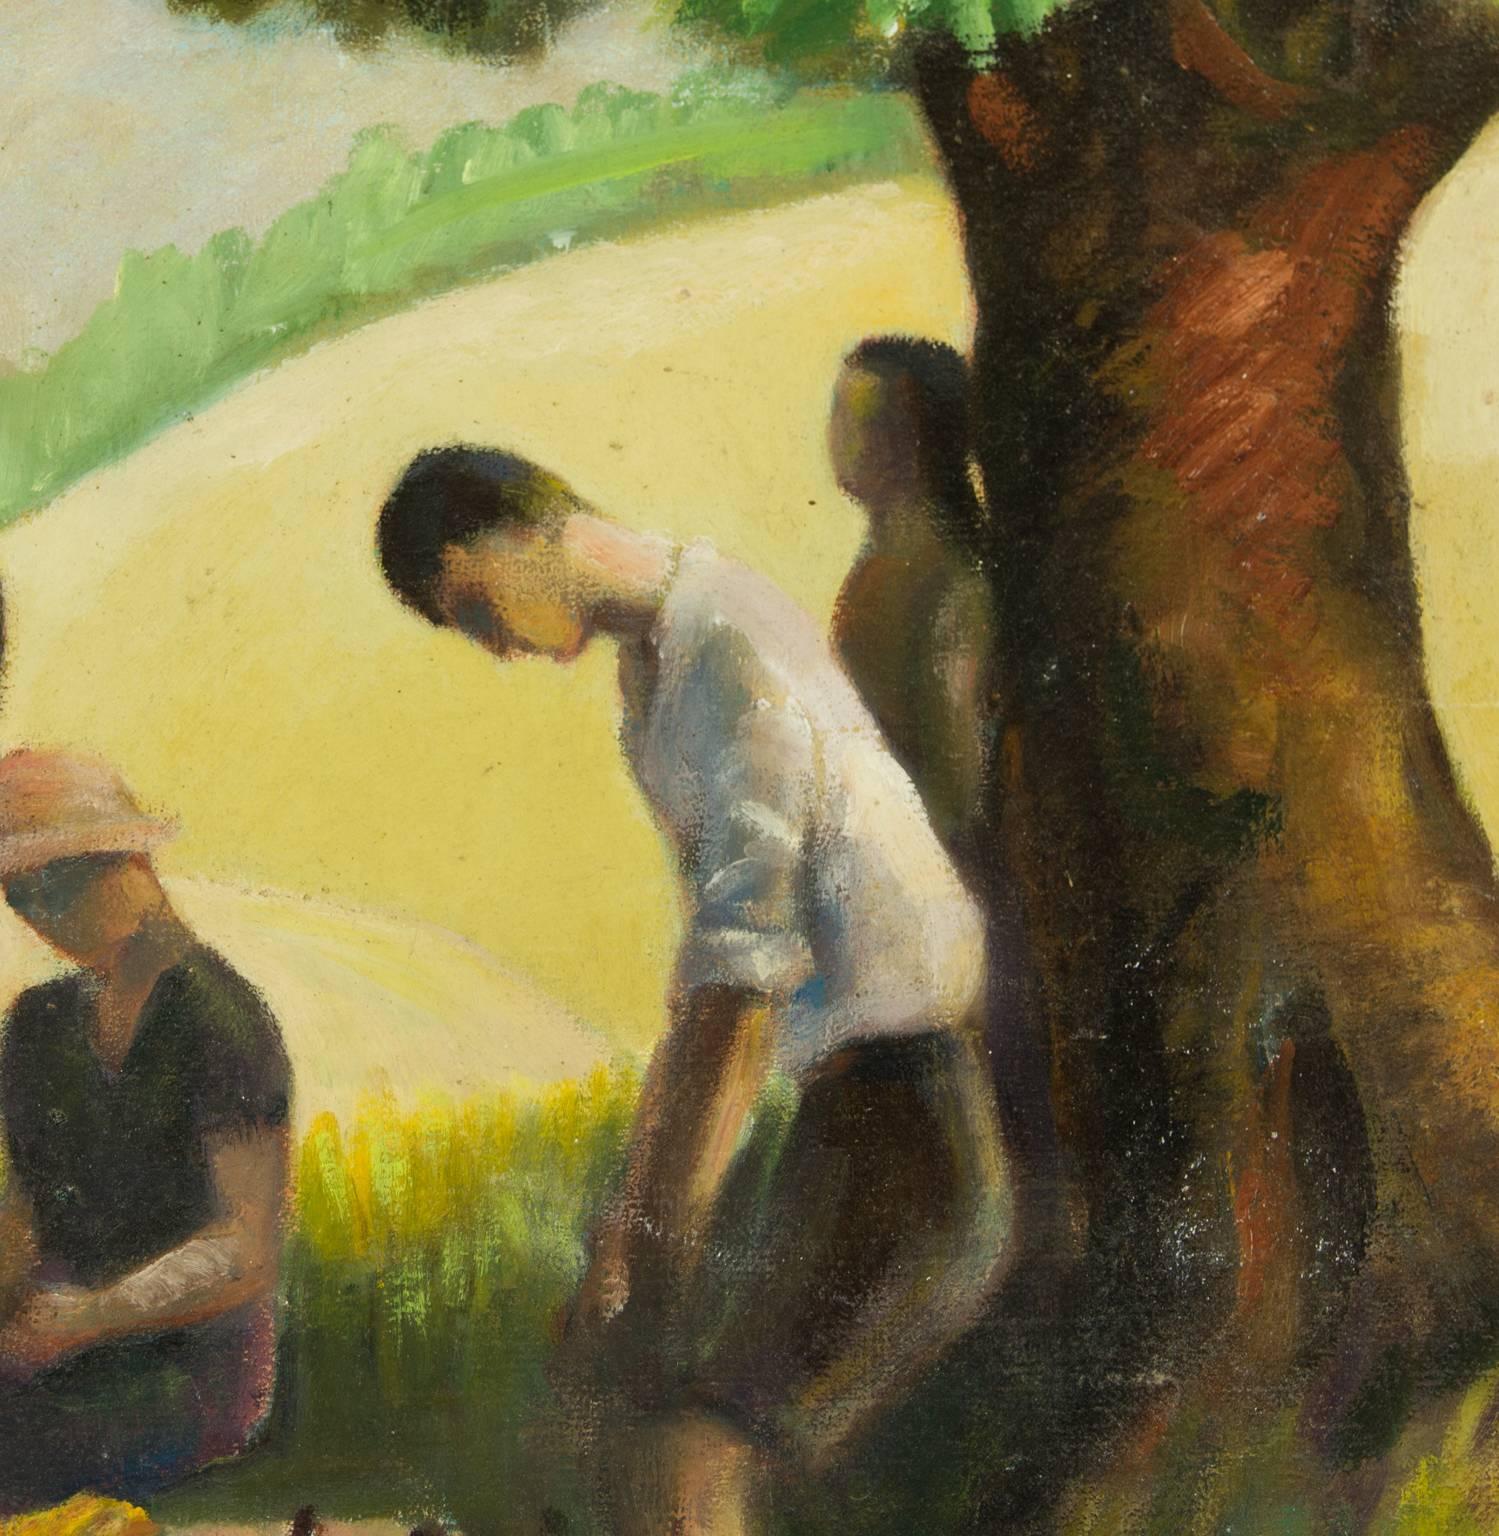 Modernist Spanish Mid 20th Century Oil - Figures at a Summer Picnic - Painting by Unknown